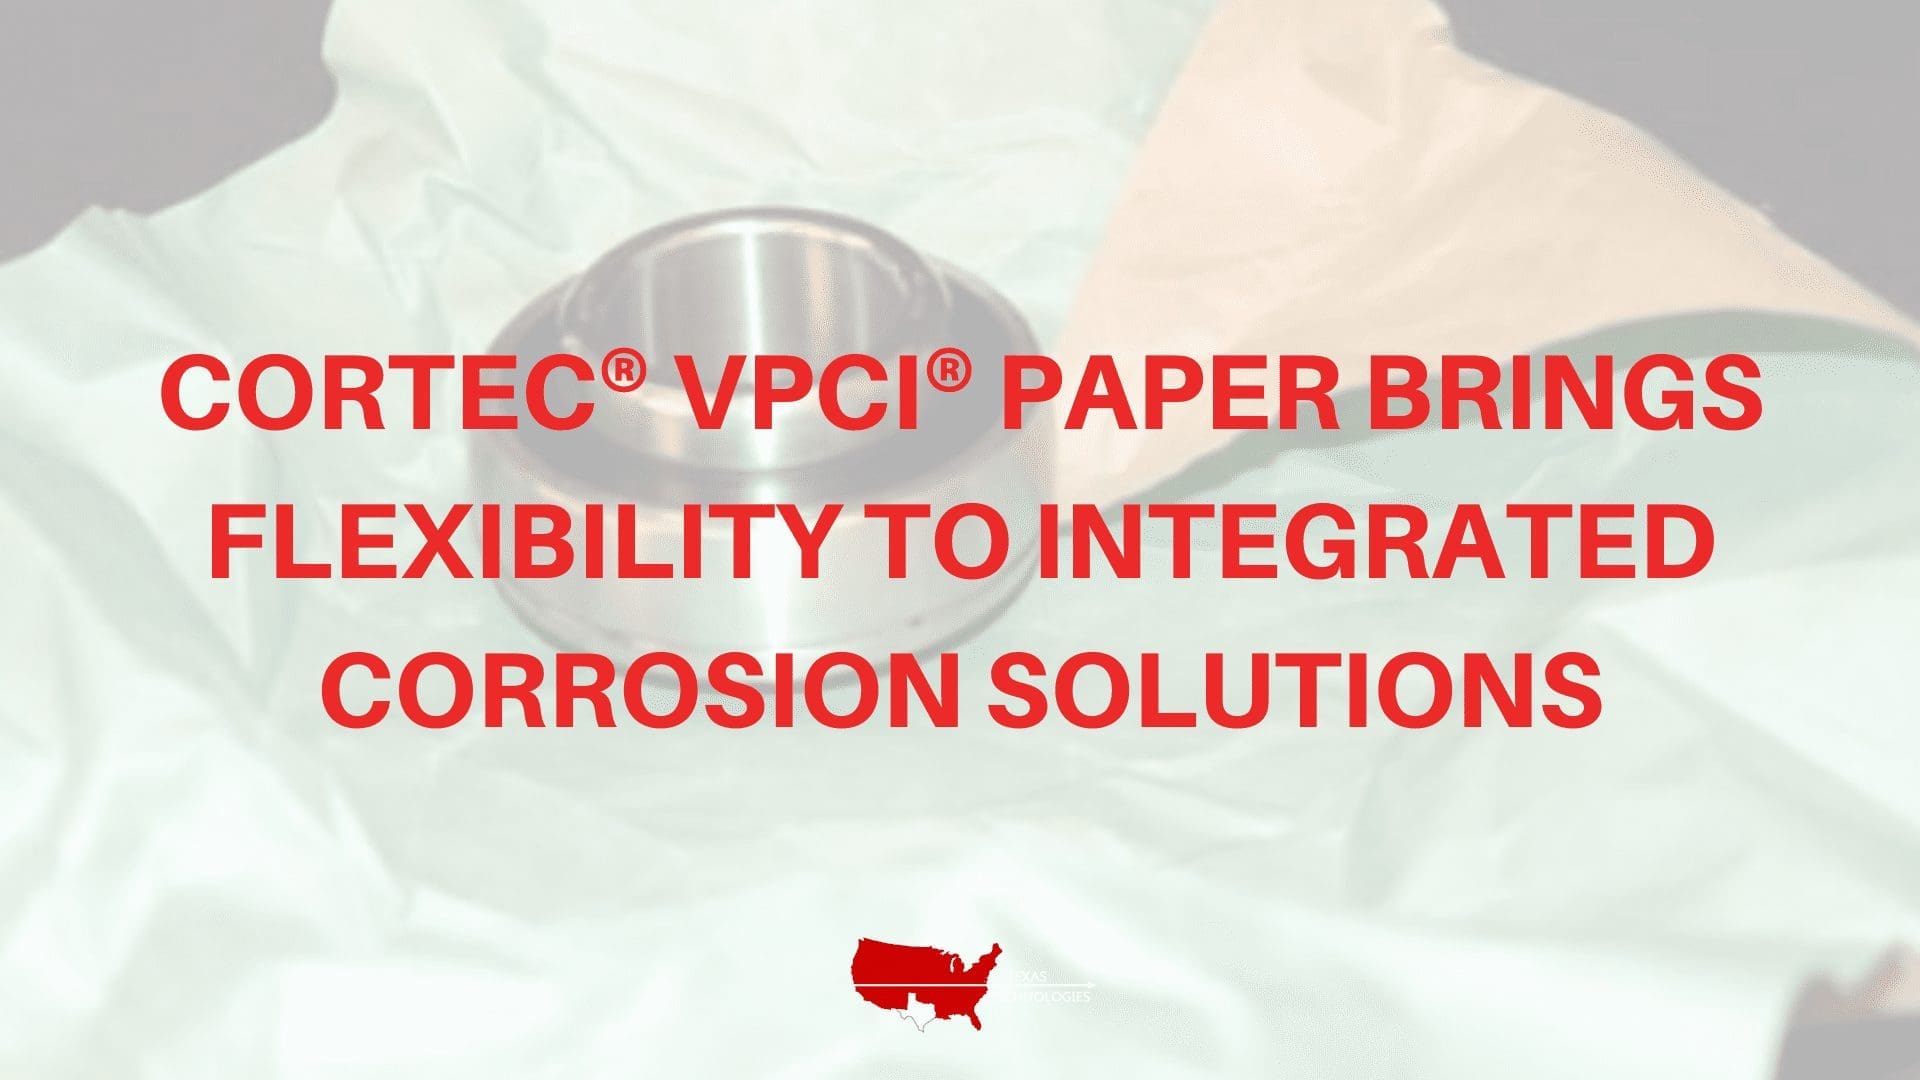 VpCI® Paper Brings Flexibility to Integrated Corrosion Solutions